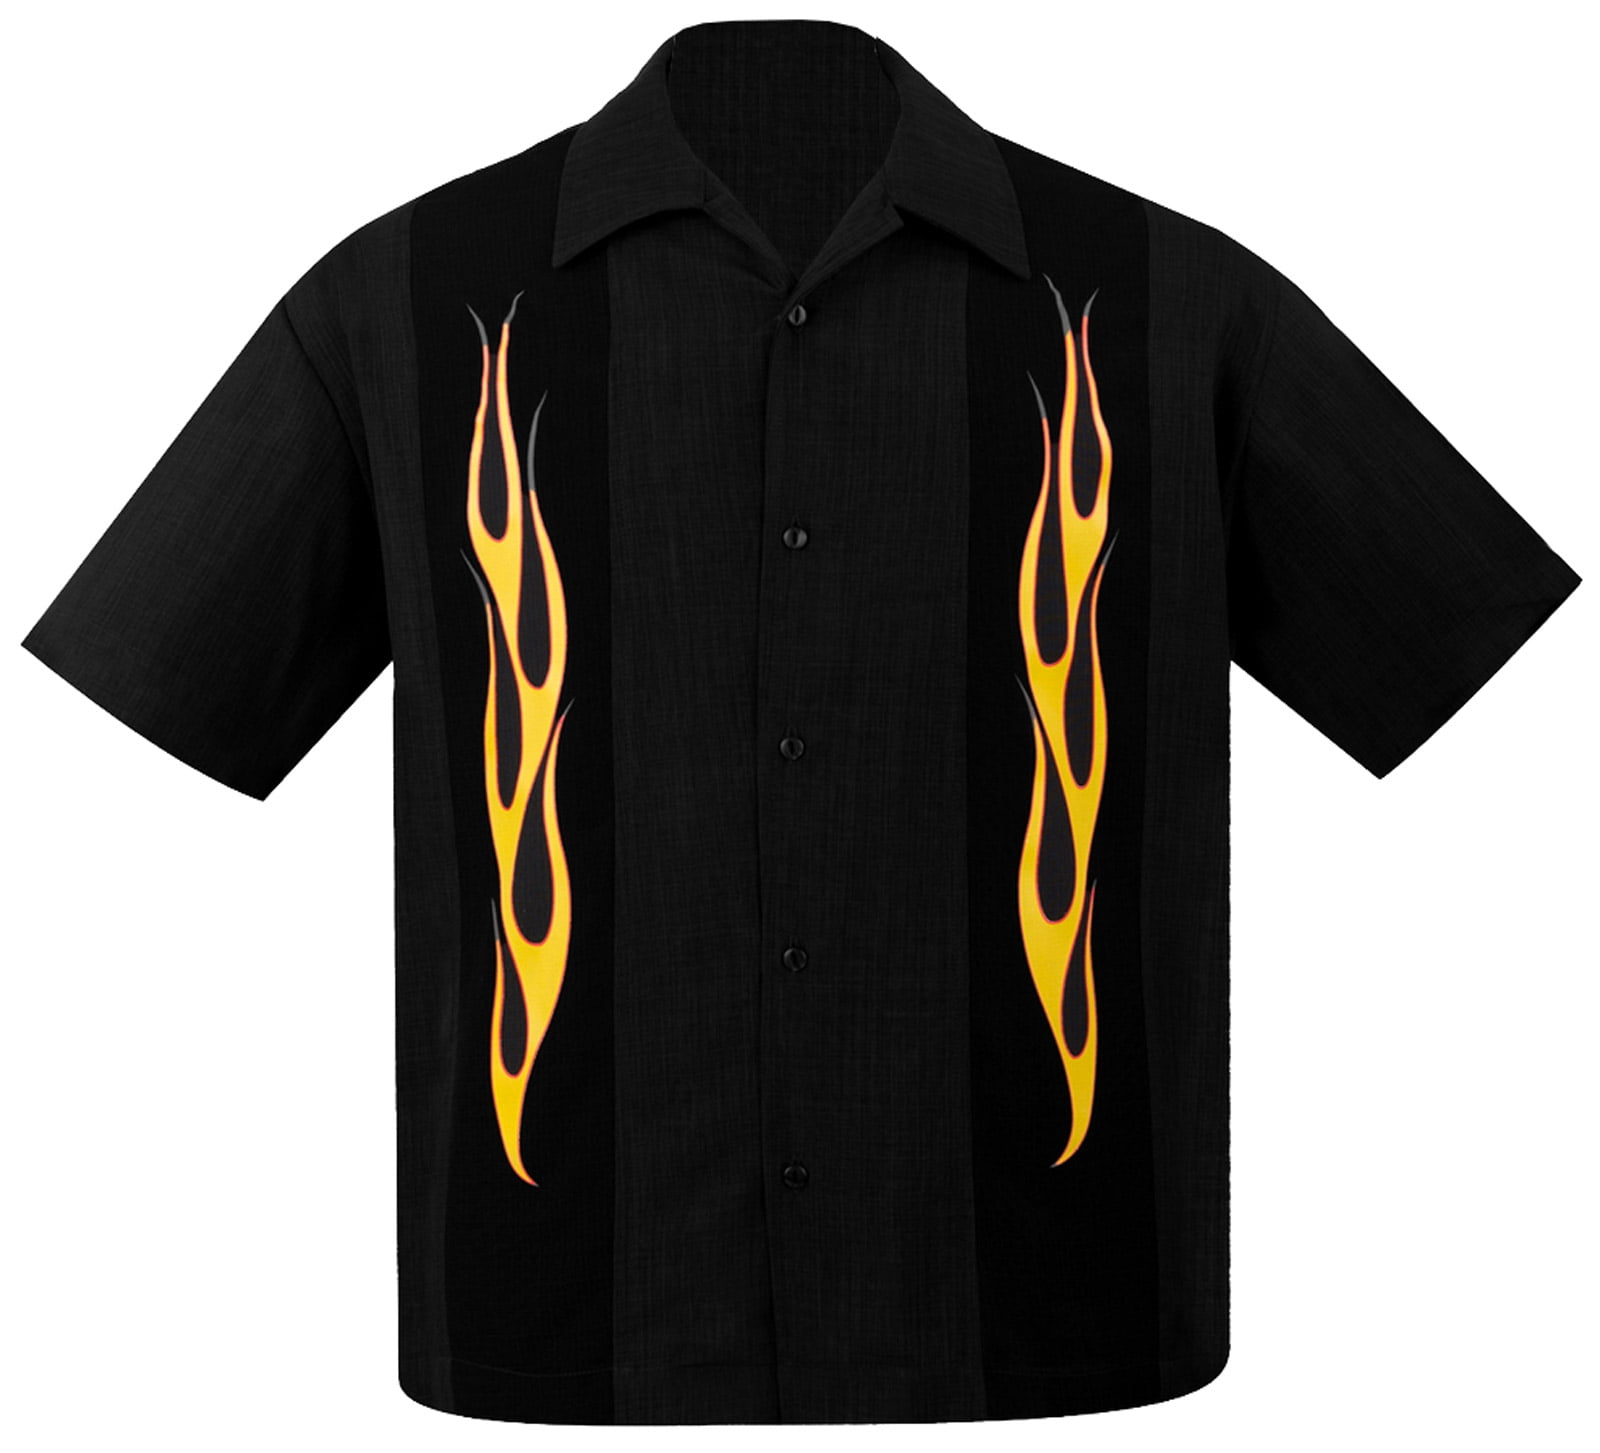 Steady Clothing Men's Flame N Hot Button Up Bowling Shirt Black ...